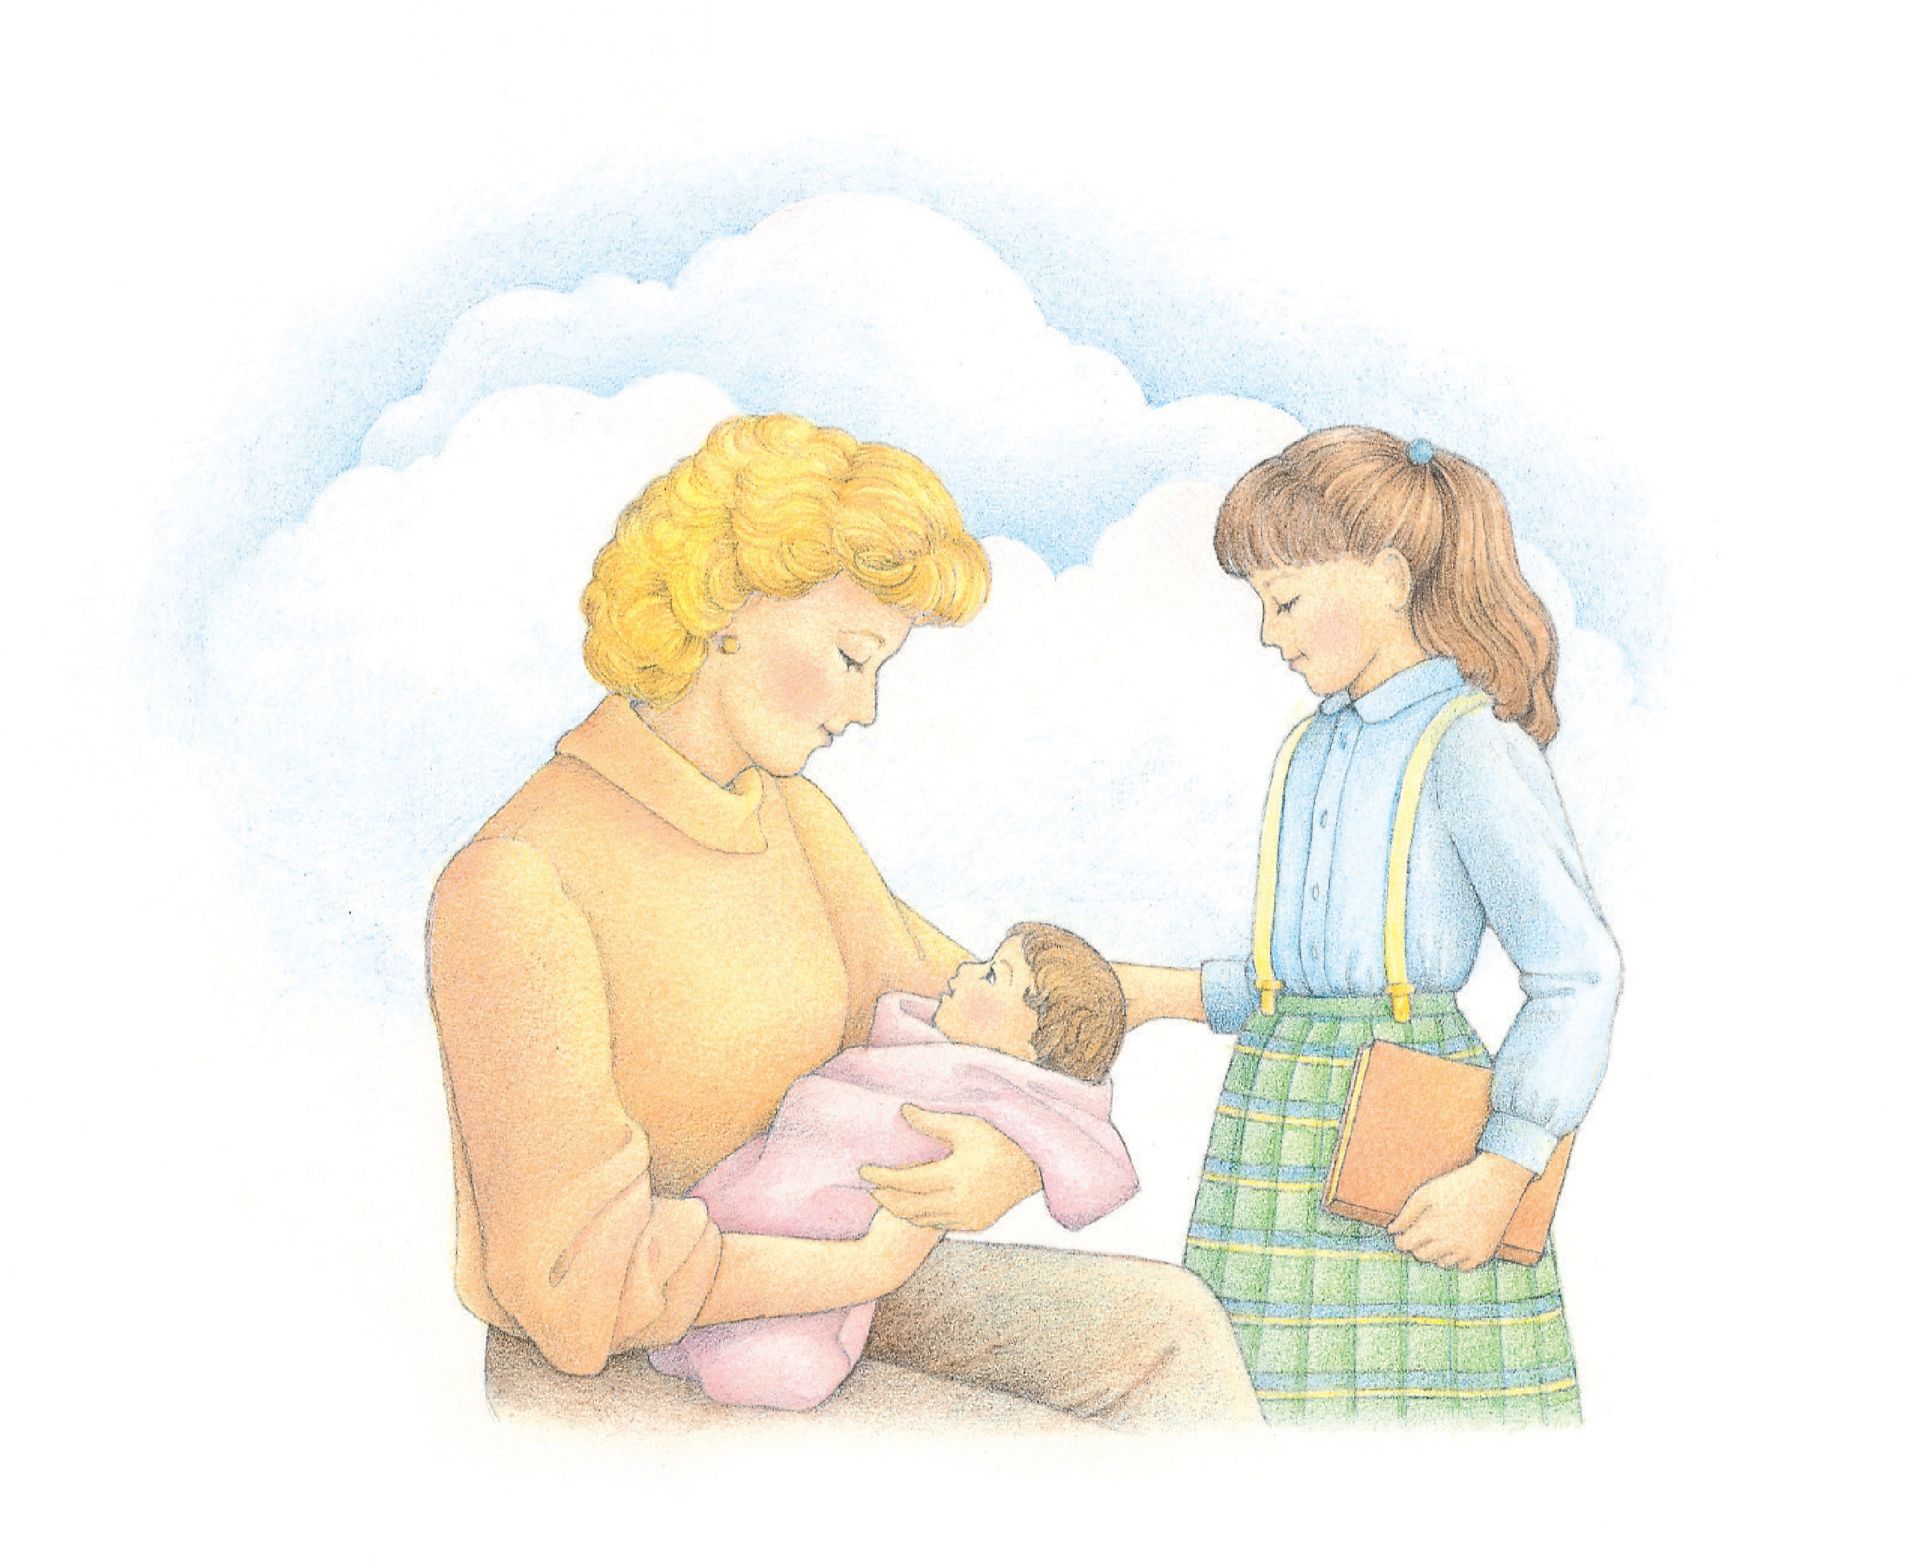 A woman holding her infant child while another child stands near. From the Children’s Songbook, page 164, “I Will Follow God’s Plan”; watercolor illustration by Beth Whittaker.